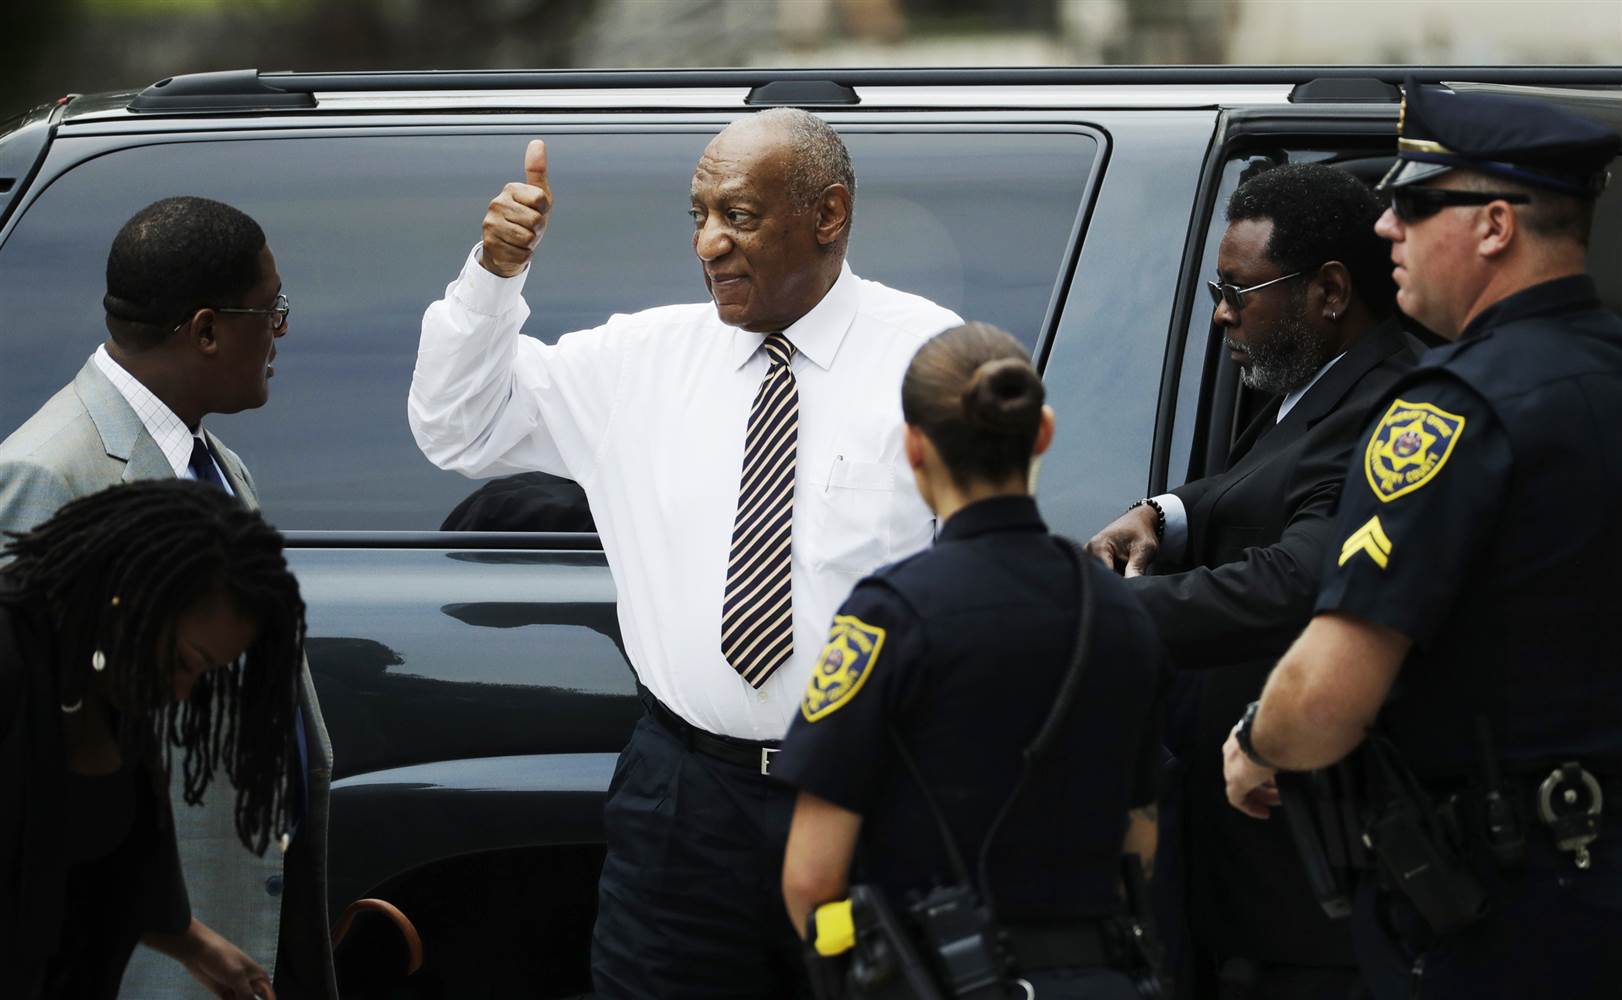 Image of Bill Cosby giving thumbs up